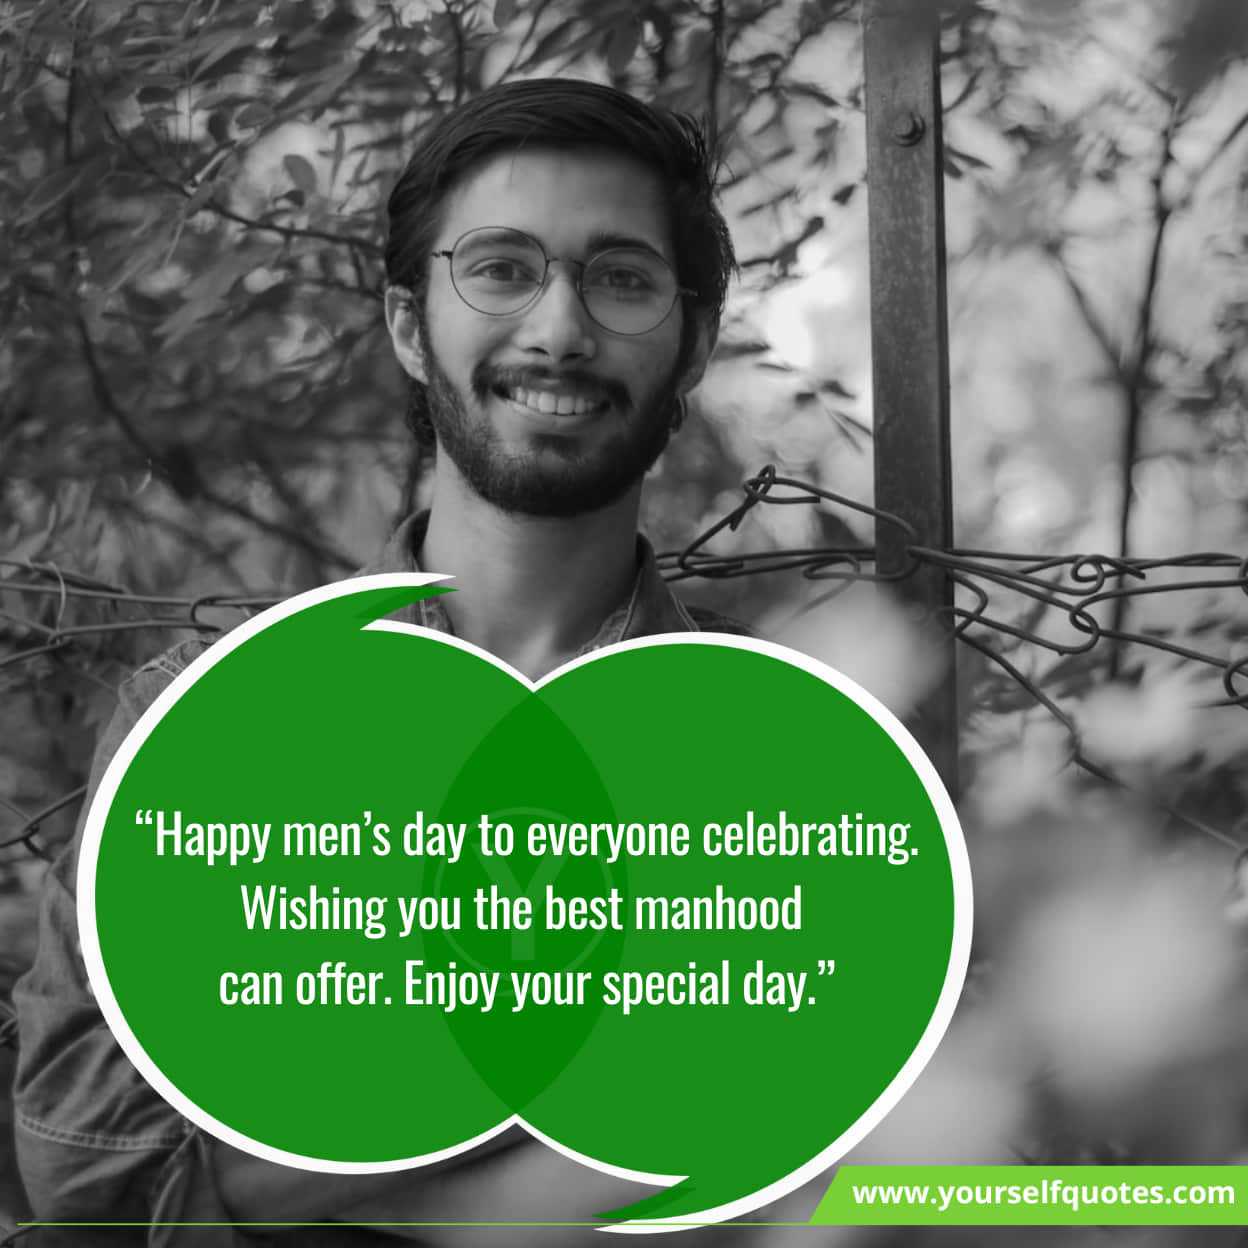 Admirable Messages For Happy Men's Day